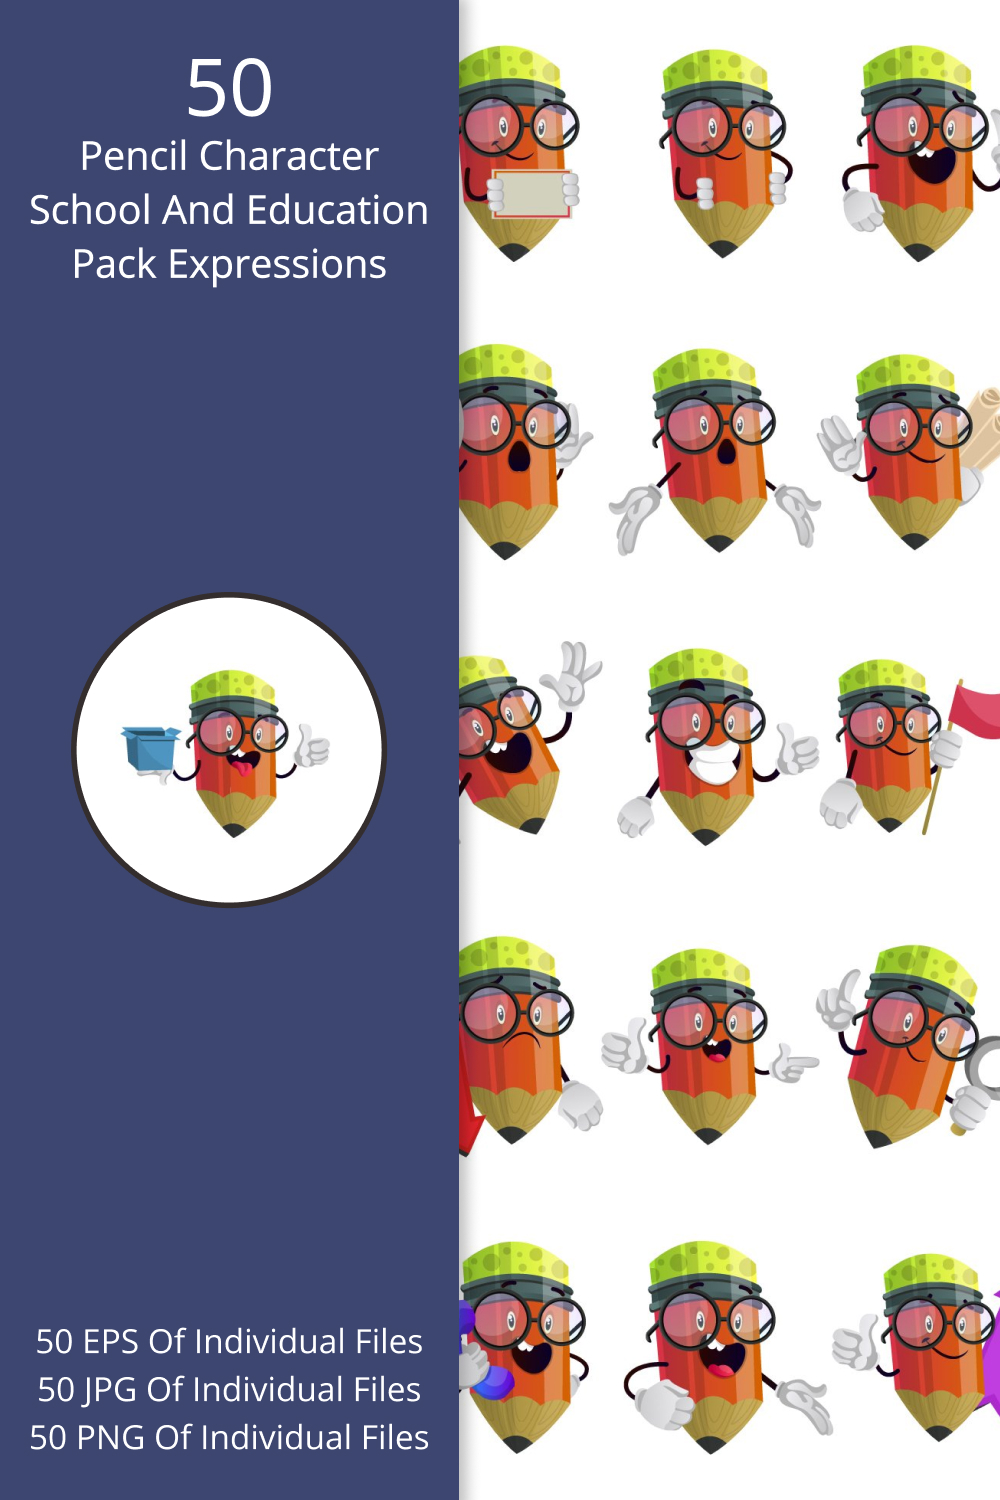 50x pencil character school and education pack expressions 02 457